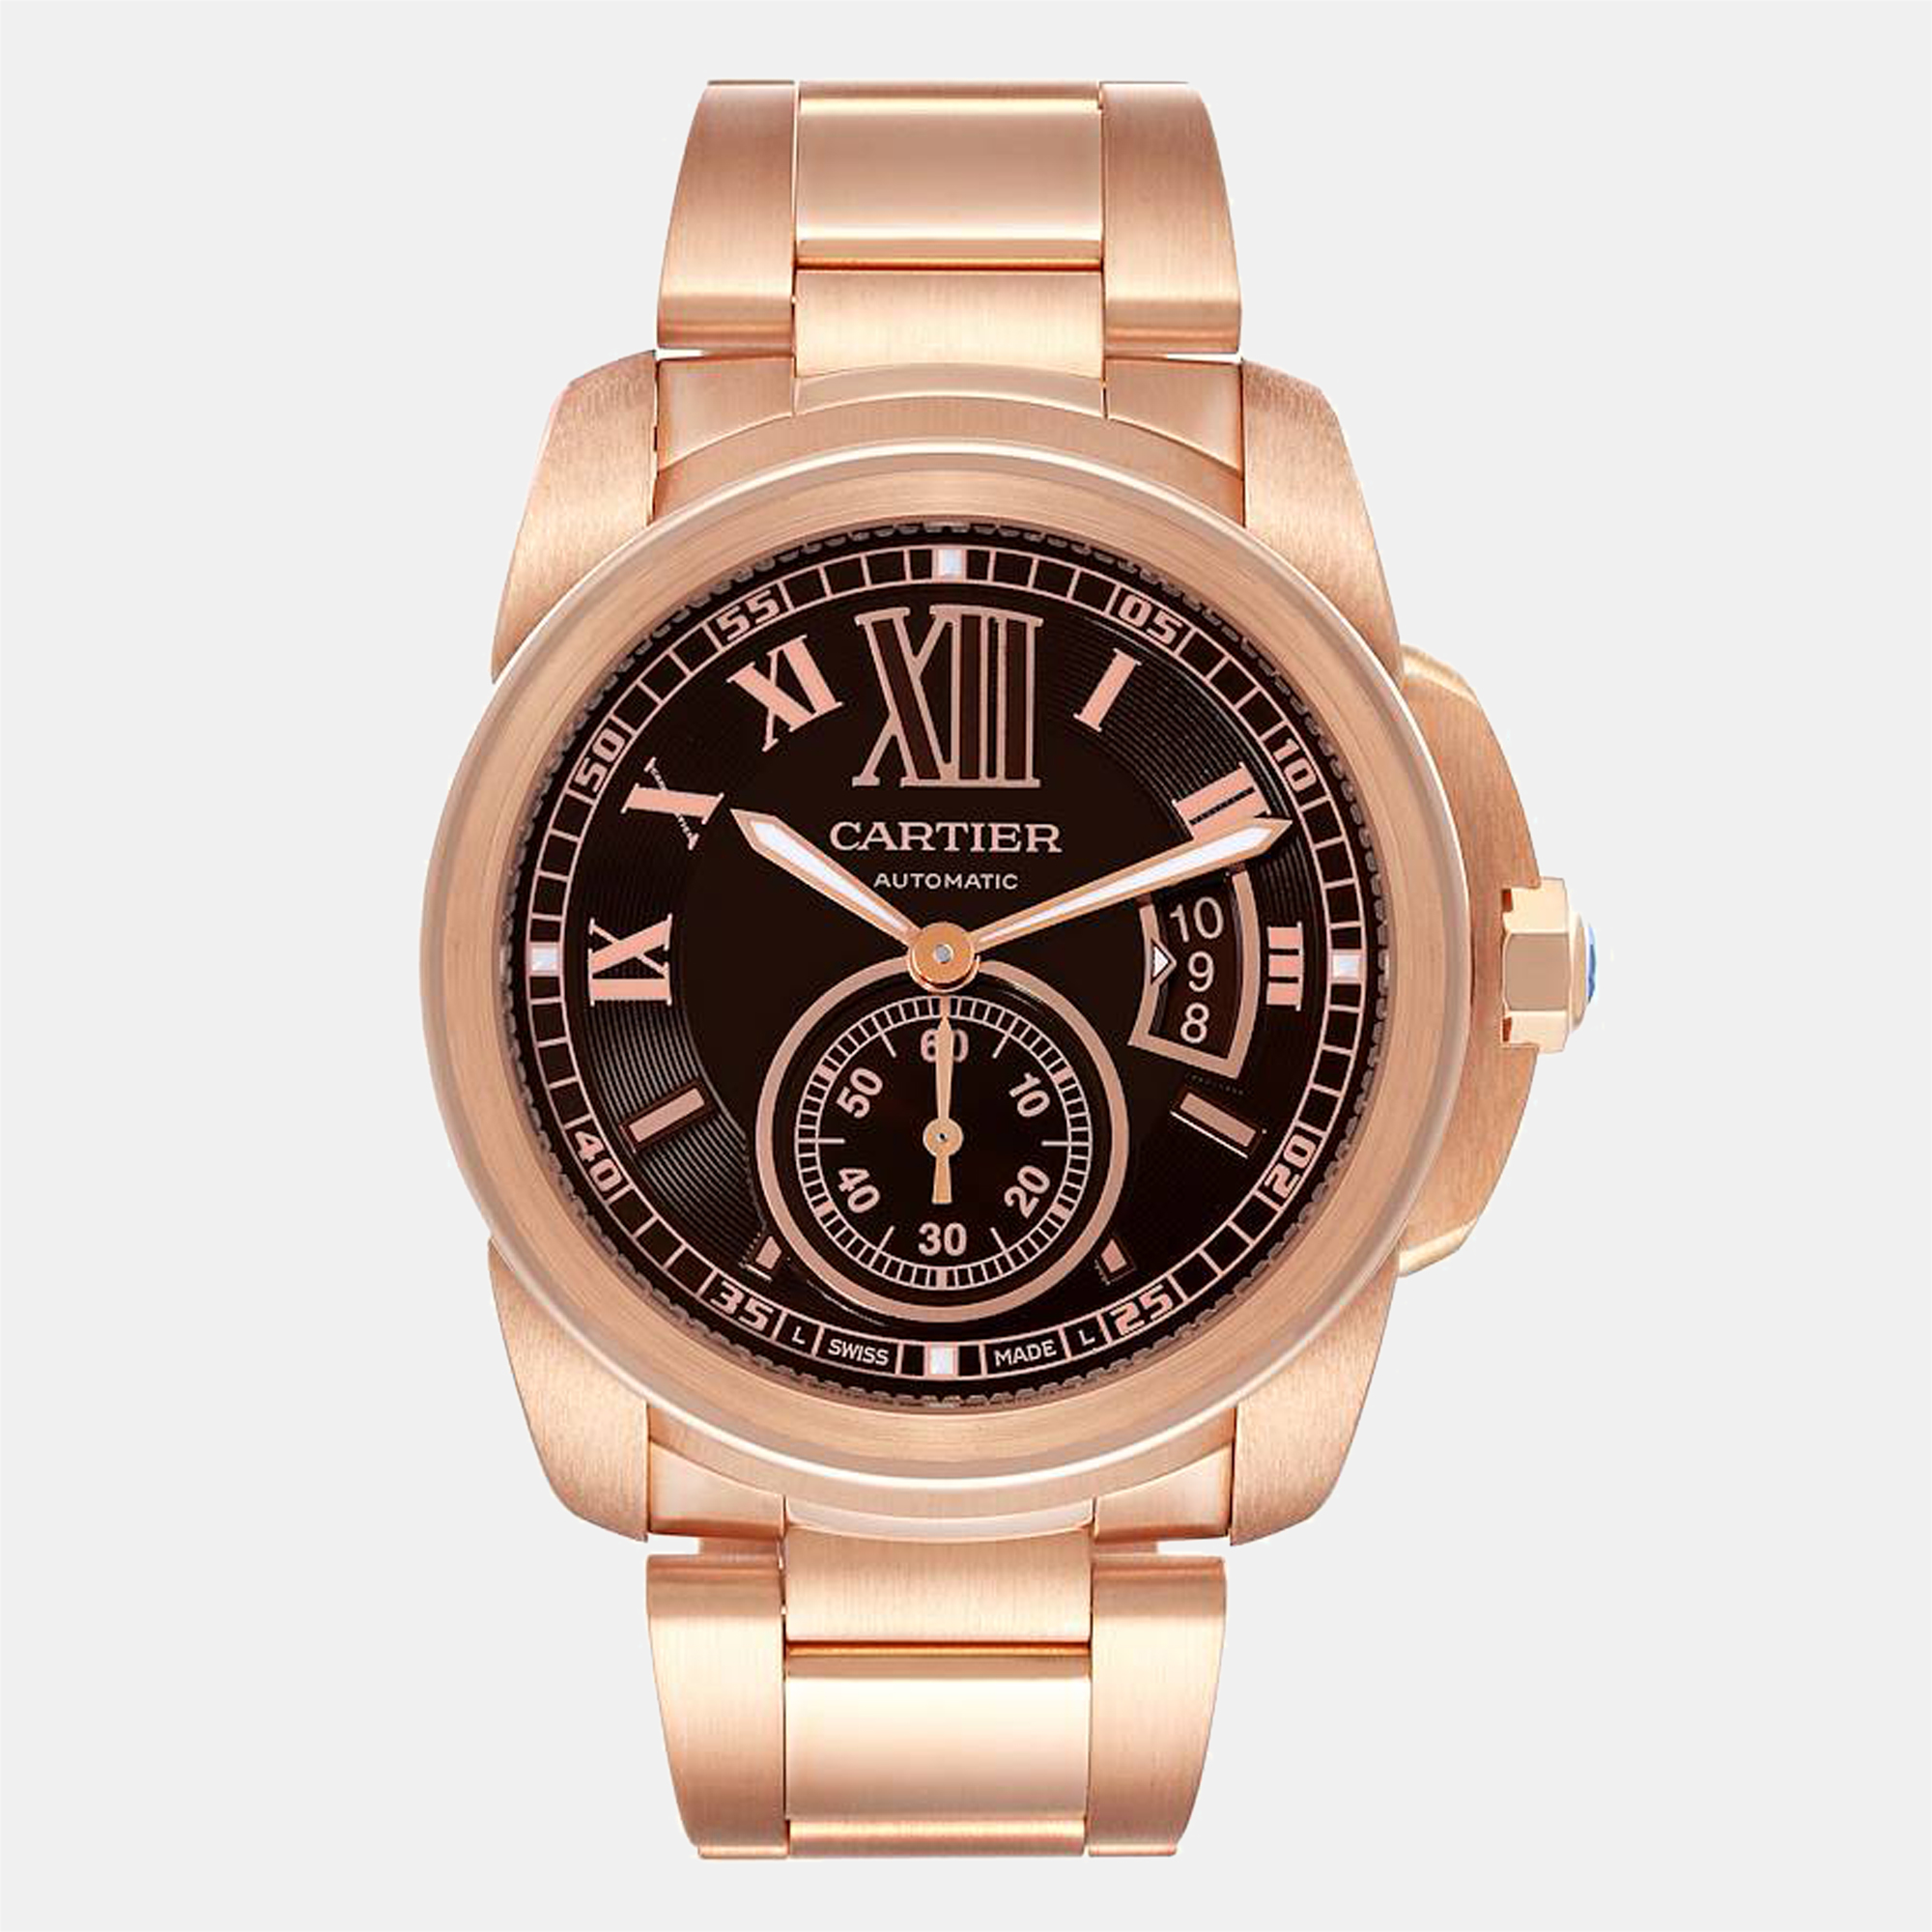 This designer watch is characterized by skillful craftsmanship and understated charm. Meticulously constructed to tell time in an elegant way it comes in a sturdy case and flaunts a seamless blend of innovative design and flawless style.